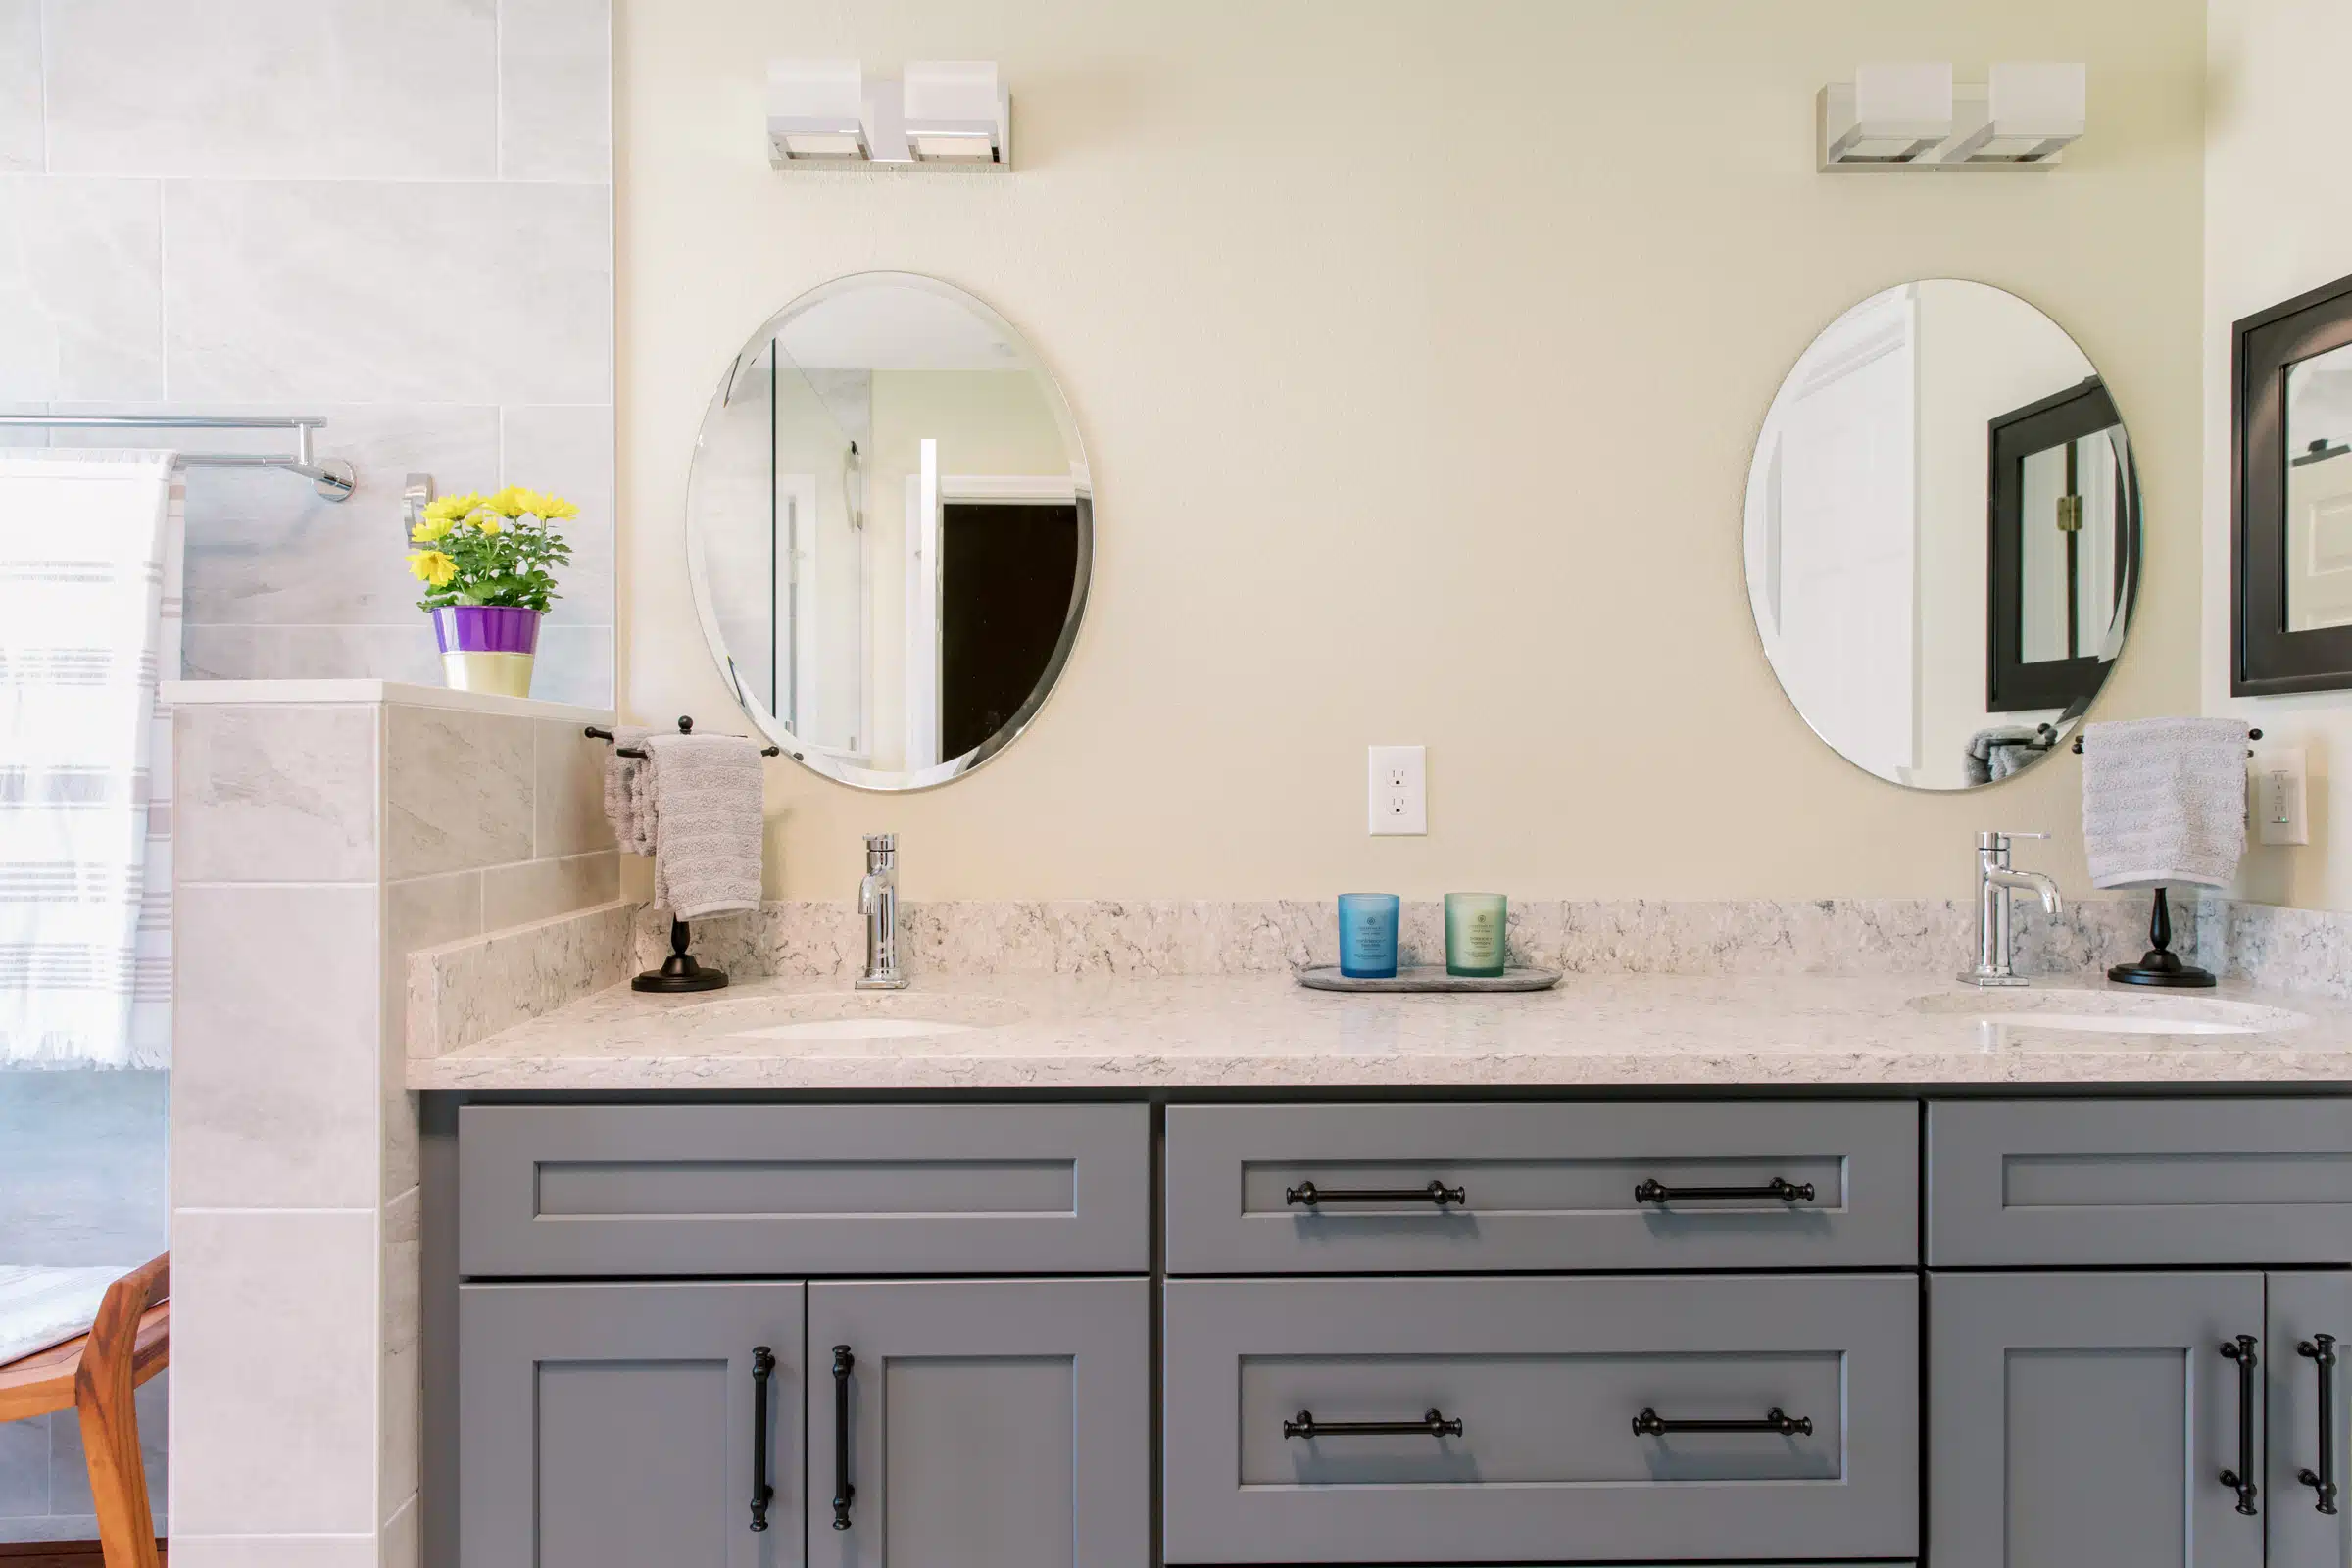 Budget Bathroom Vanity from JSI helped update this master bath on a budget